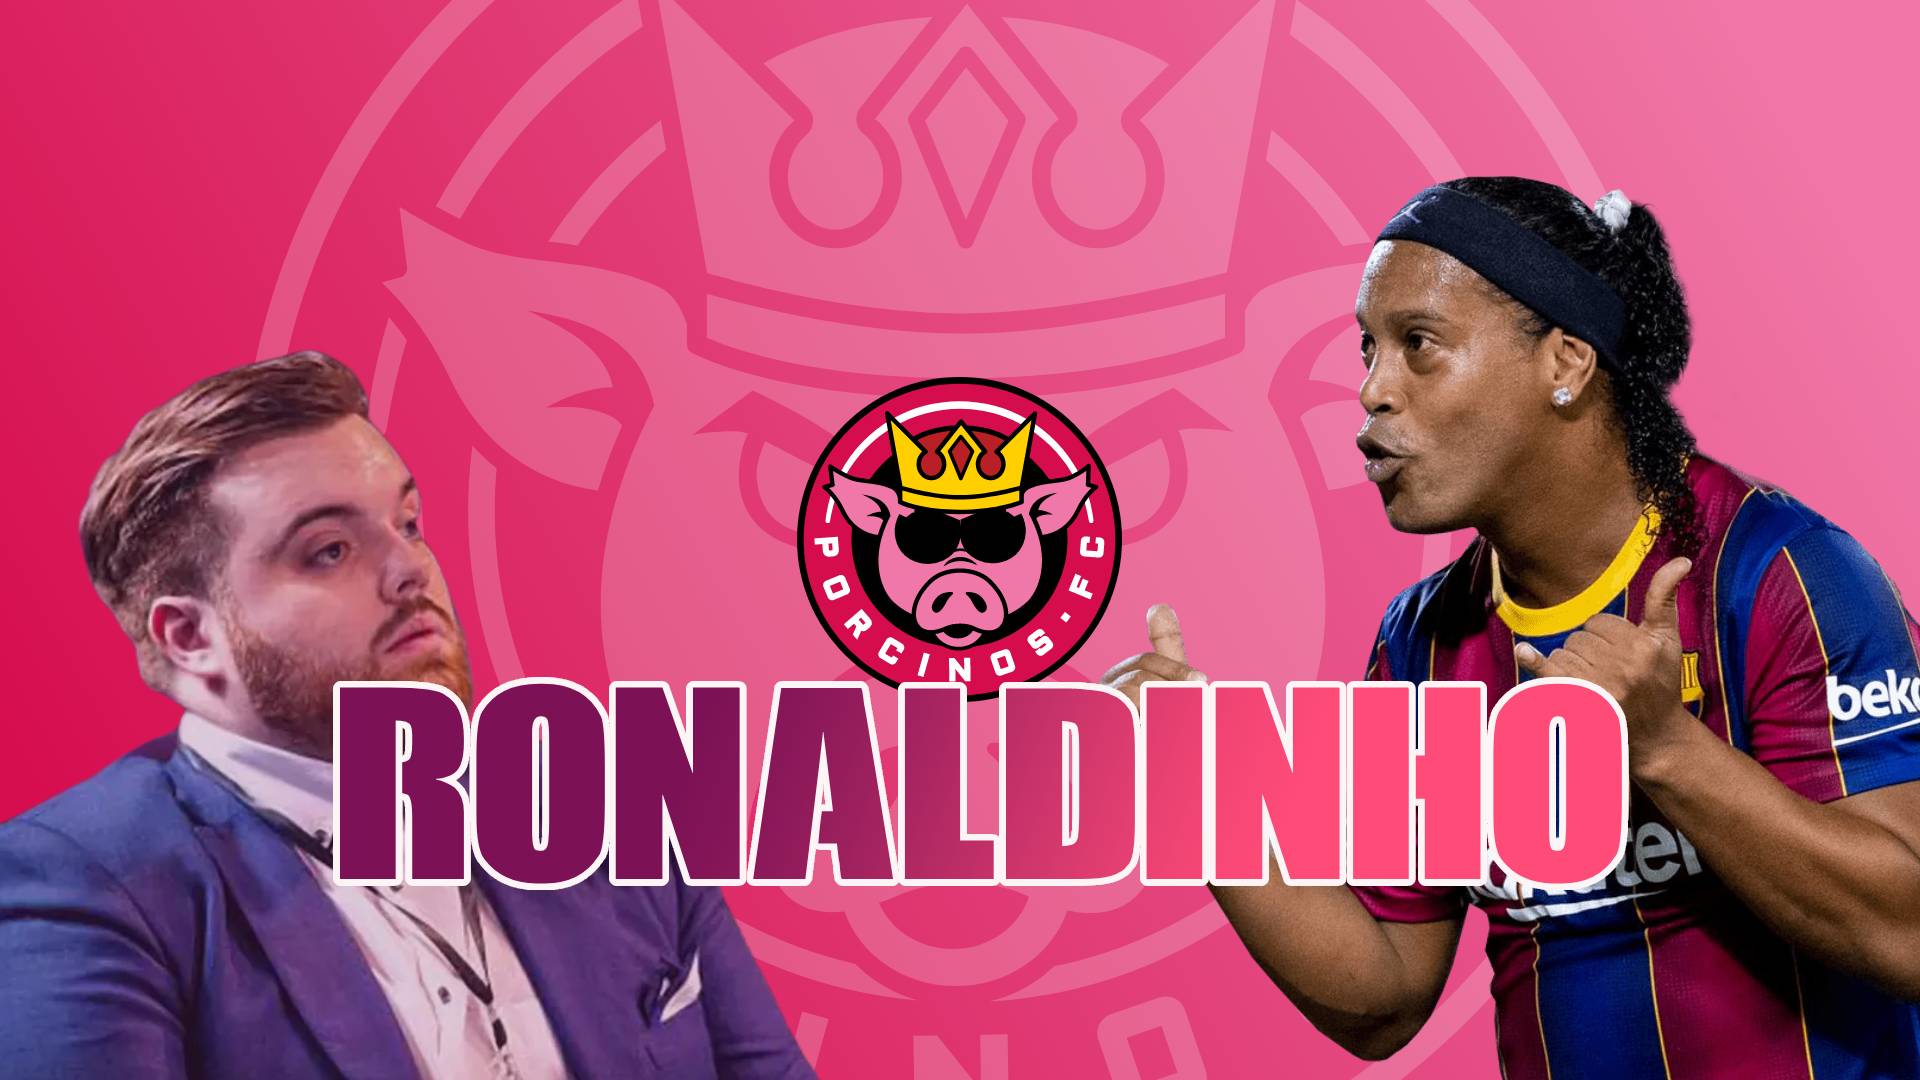 Ronaldinho is Ibai’s new signing for Kings League Porcinos FC